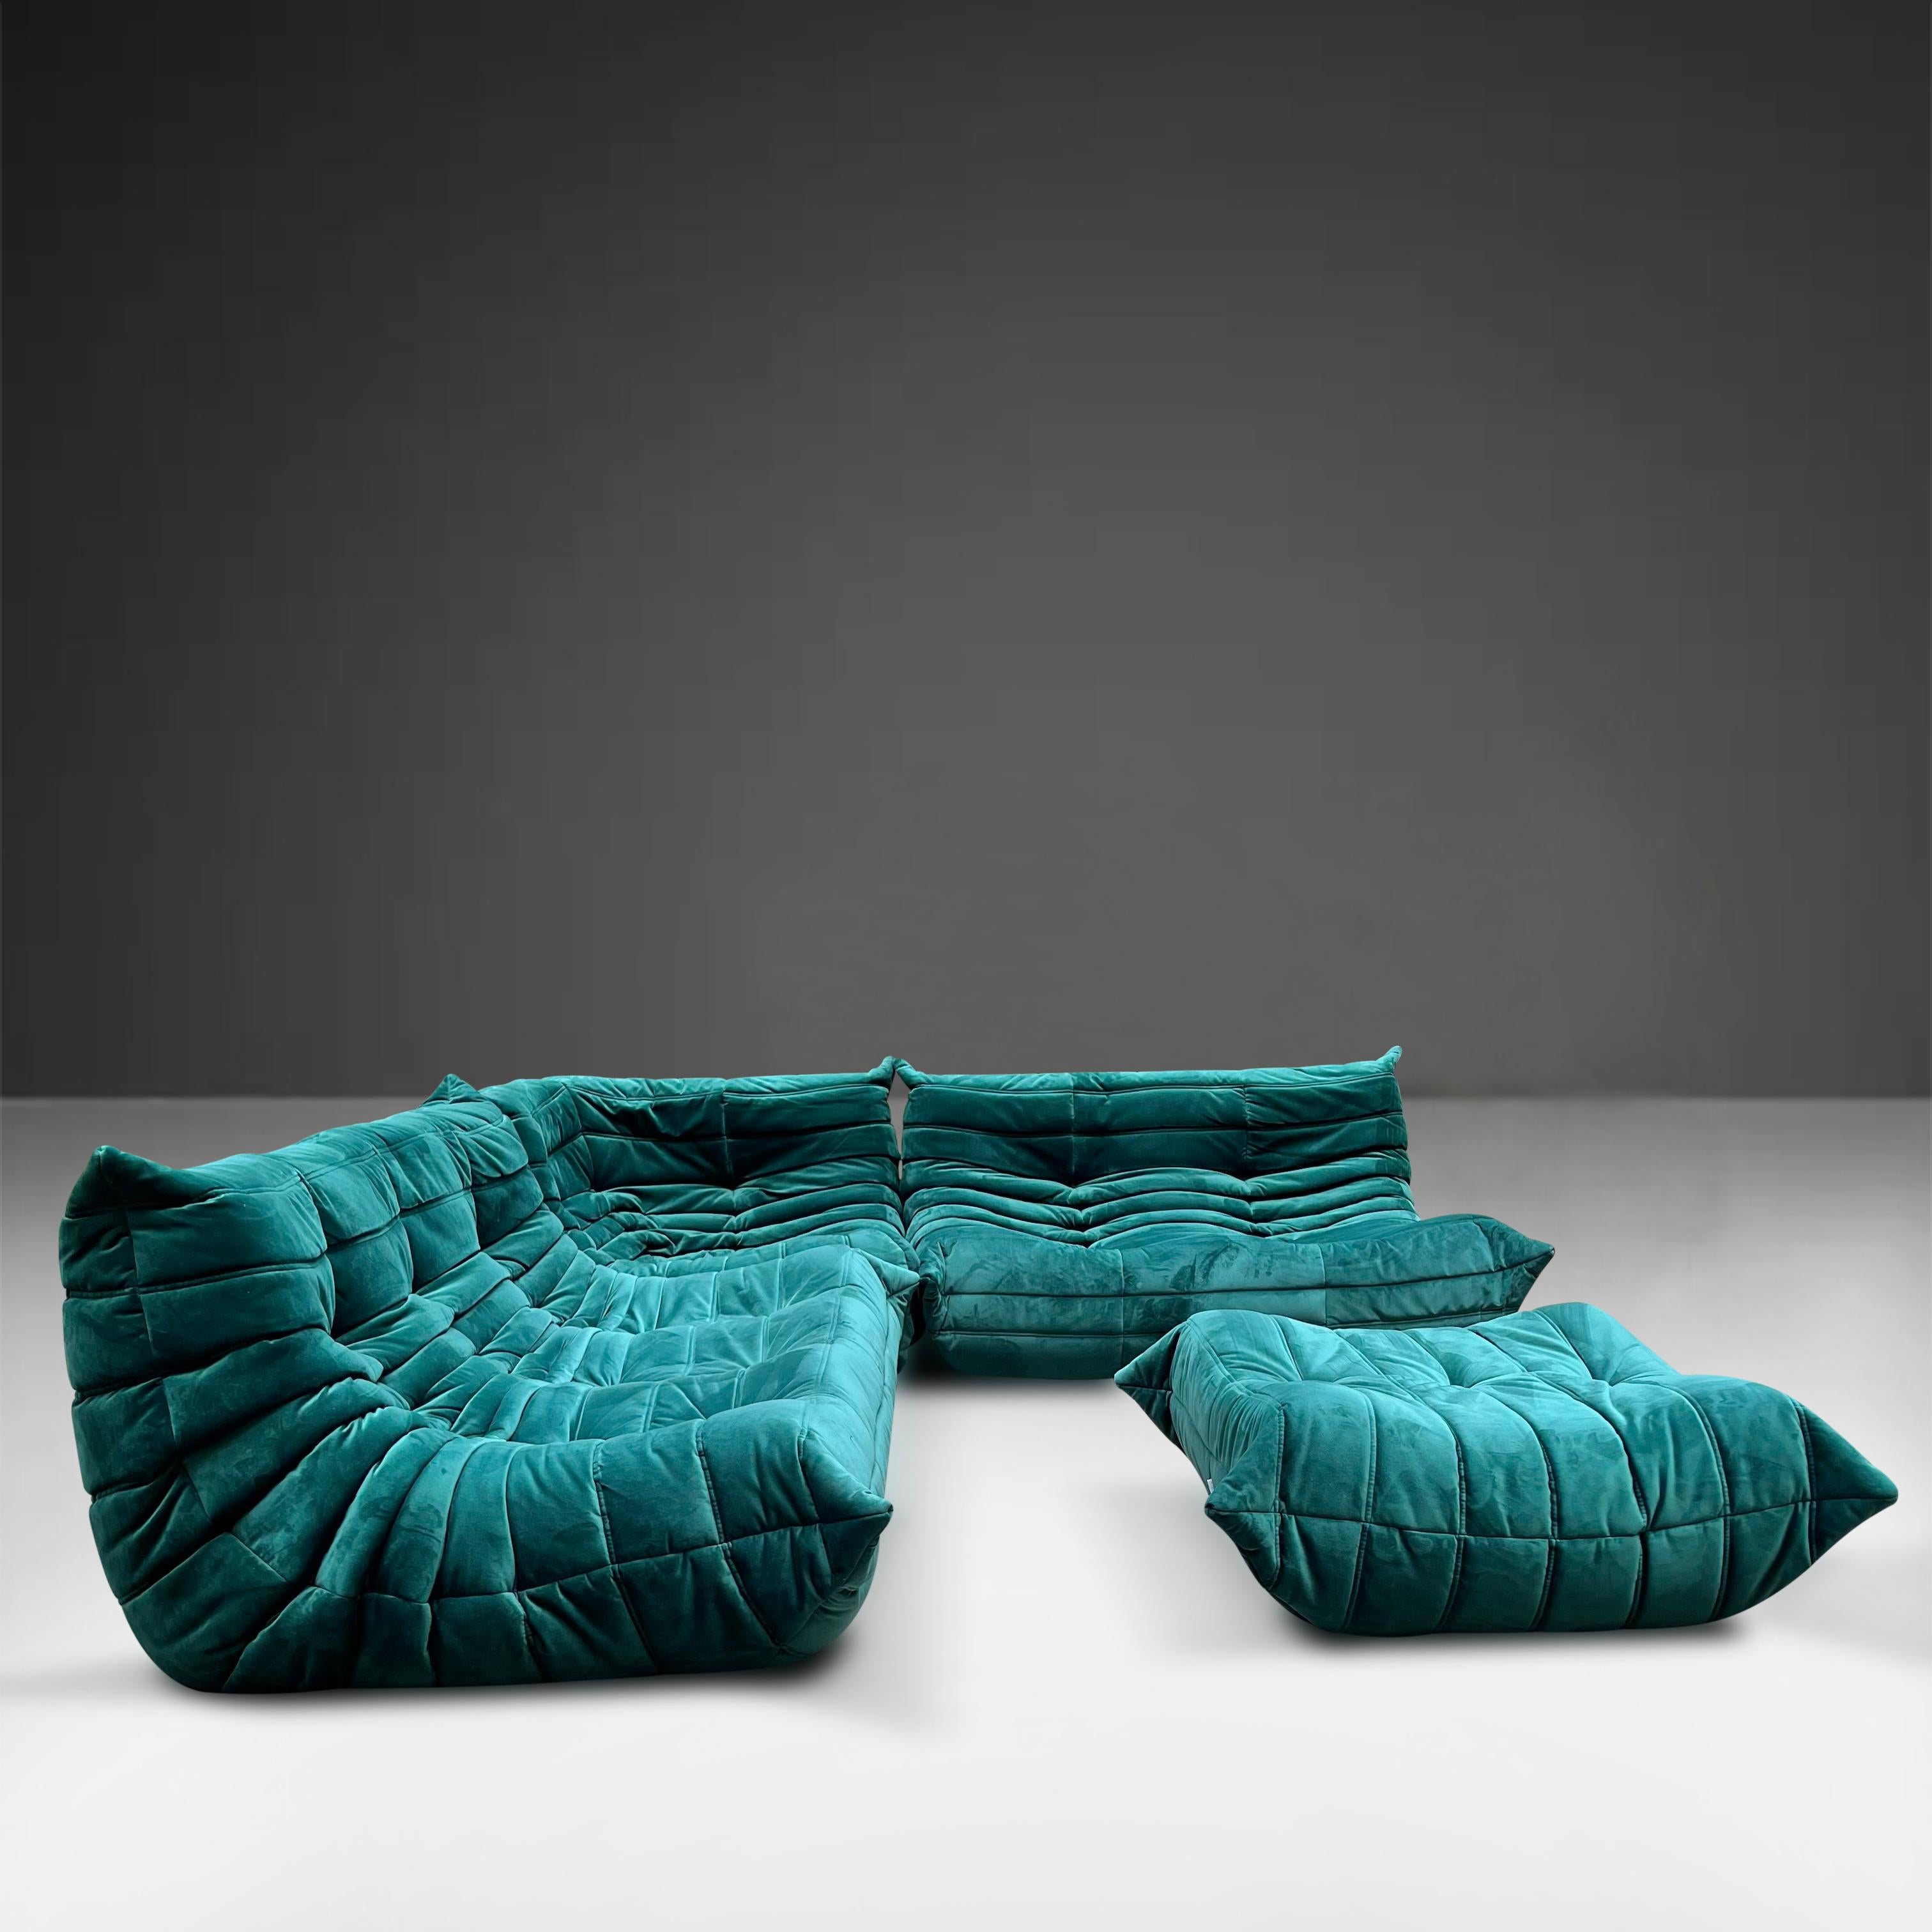 Fabric Ligne Roset Togo Emerald Green Seating Two Sofas, Corner and Ottoman Set of Four